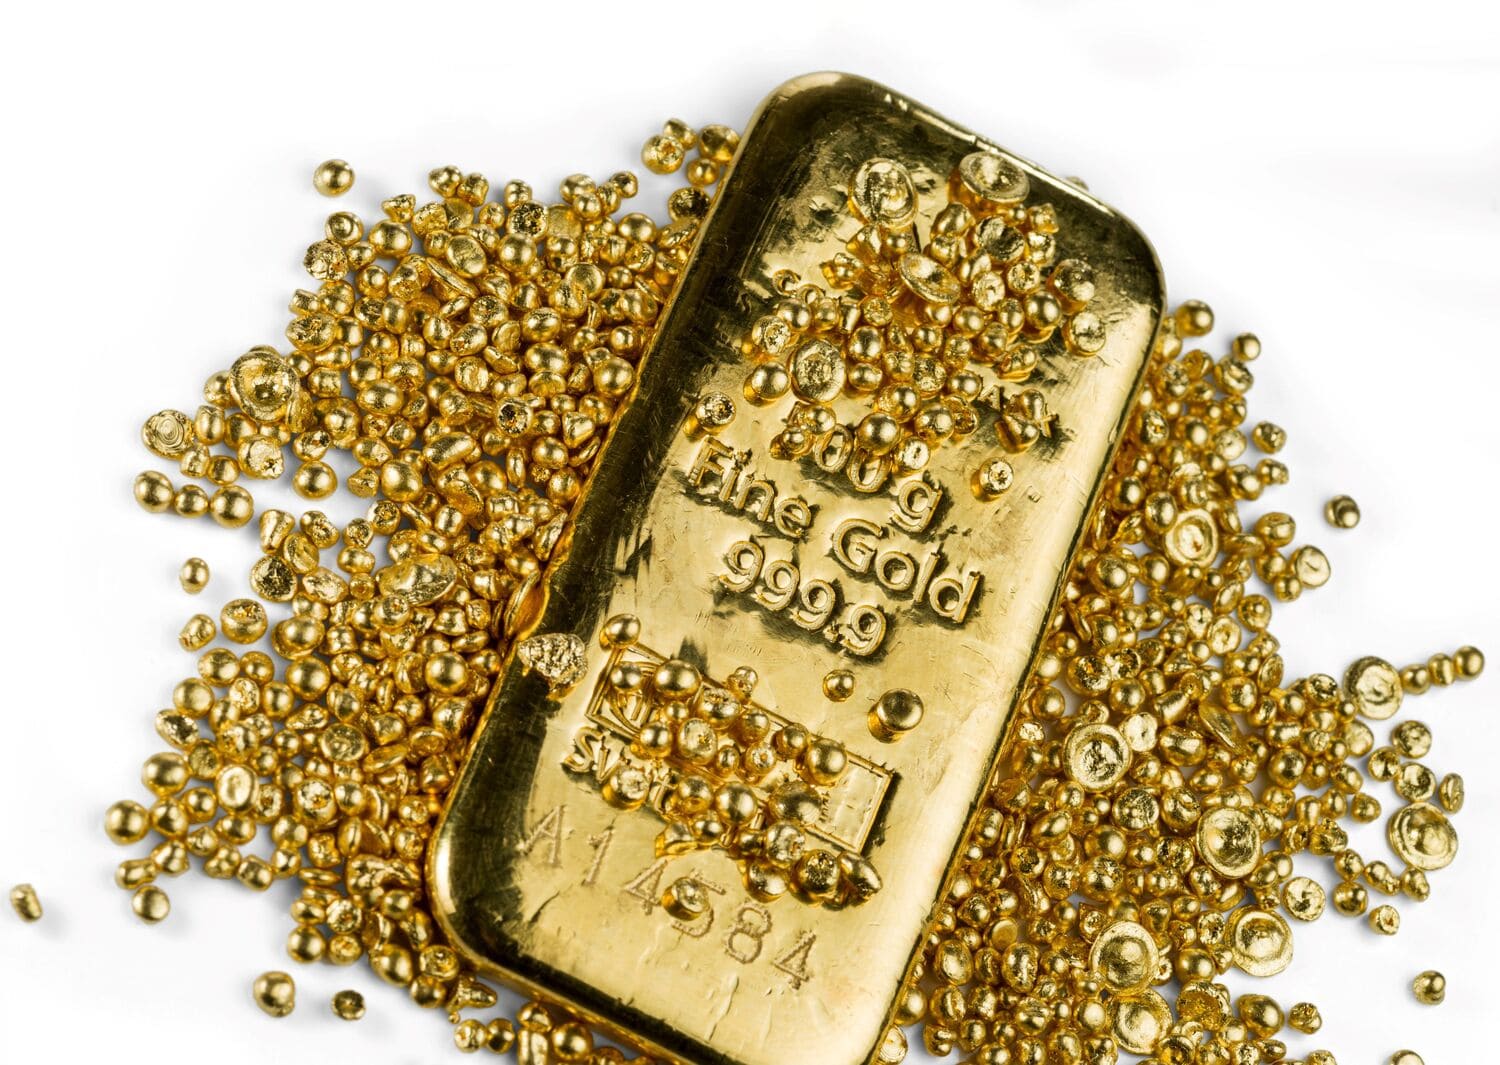 Gold bars surrounded by gold granulate